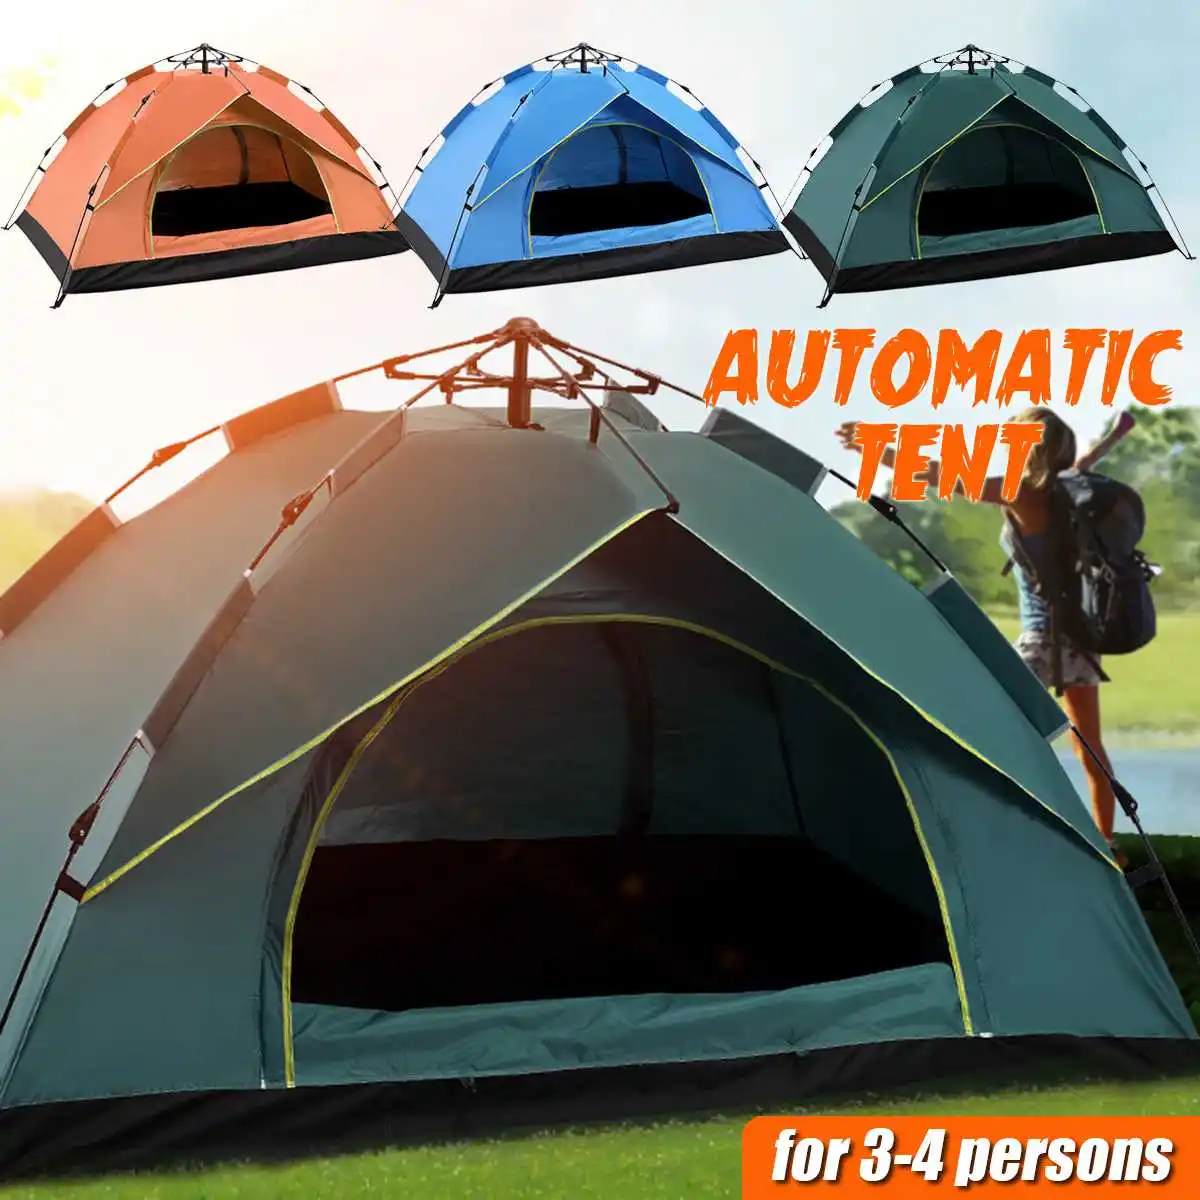 

3-4 Person Automatic Opening up Tent Camping Tent Easy Instant Setup Protable Backpacking for Sun Shelter Travelling Hiking